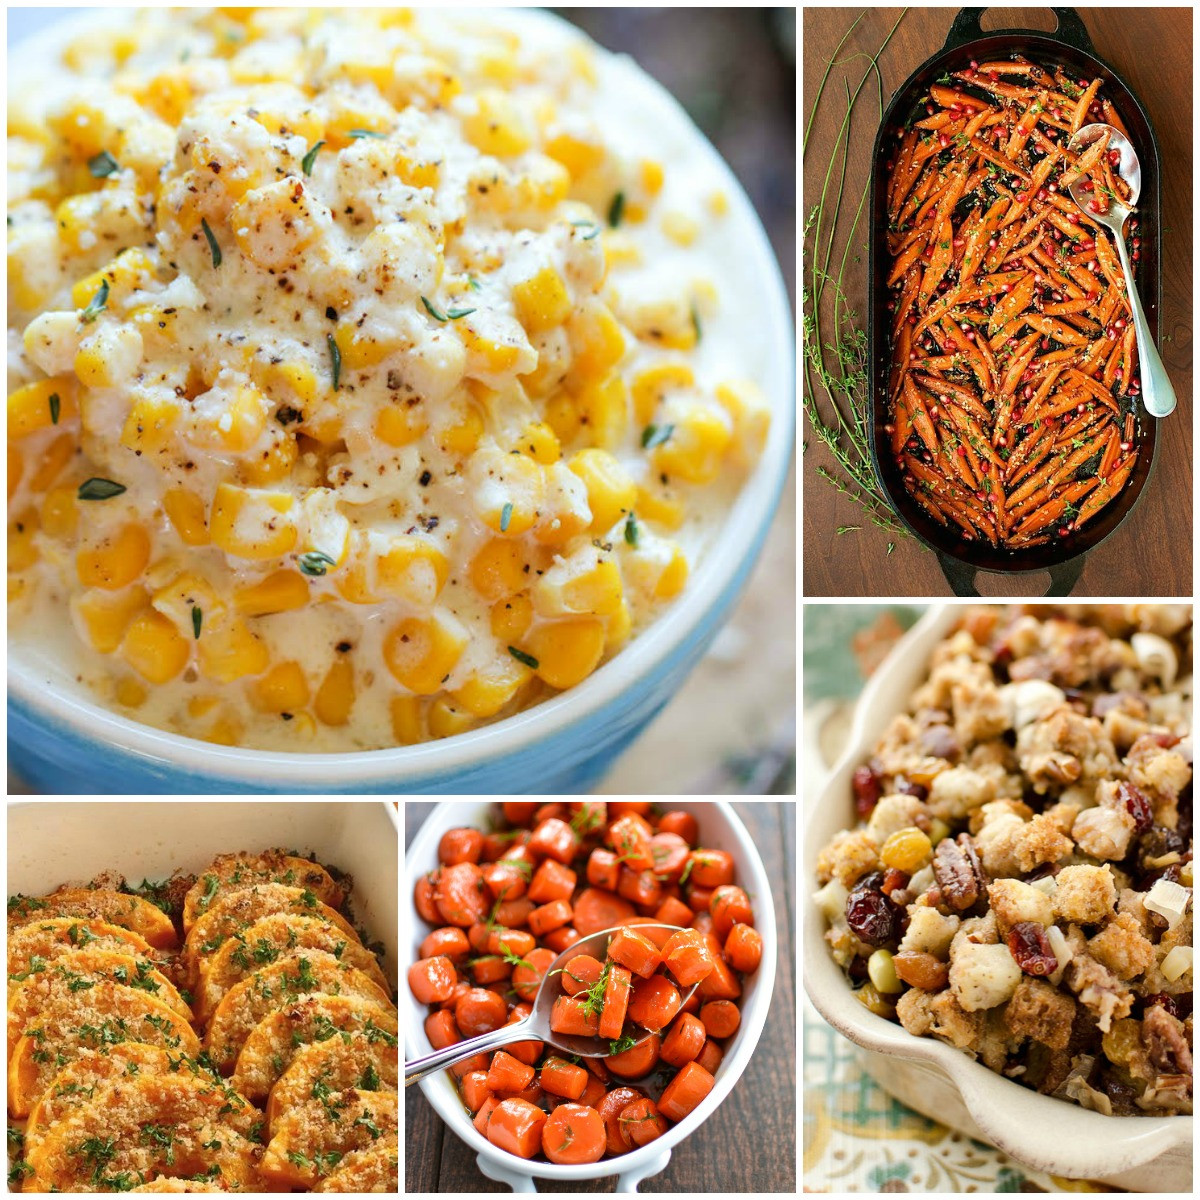 Thanksgiving Side Dishes Recipes
 25 Most Pinned Side Dish Recipes for Thanksgiving and